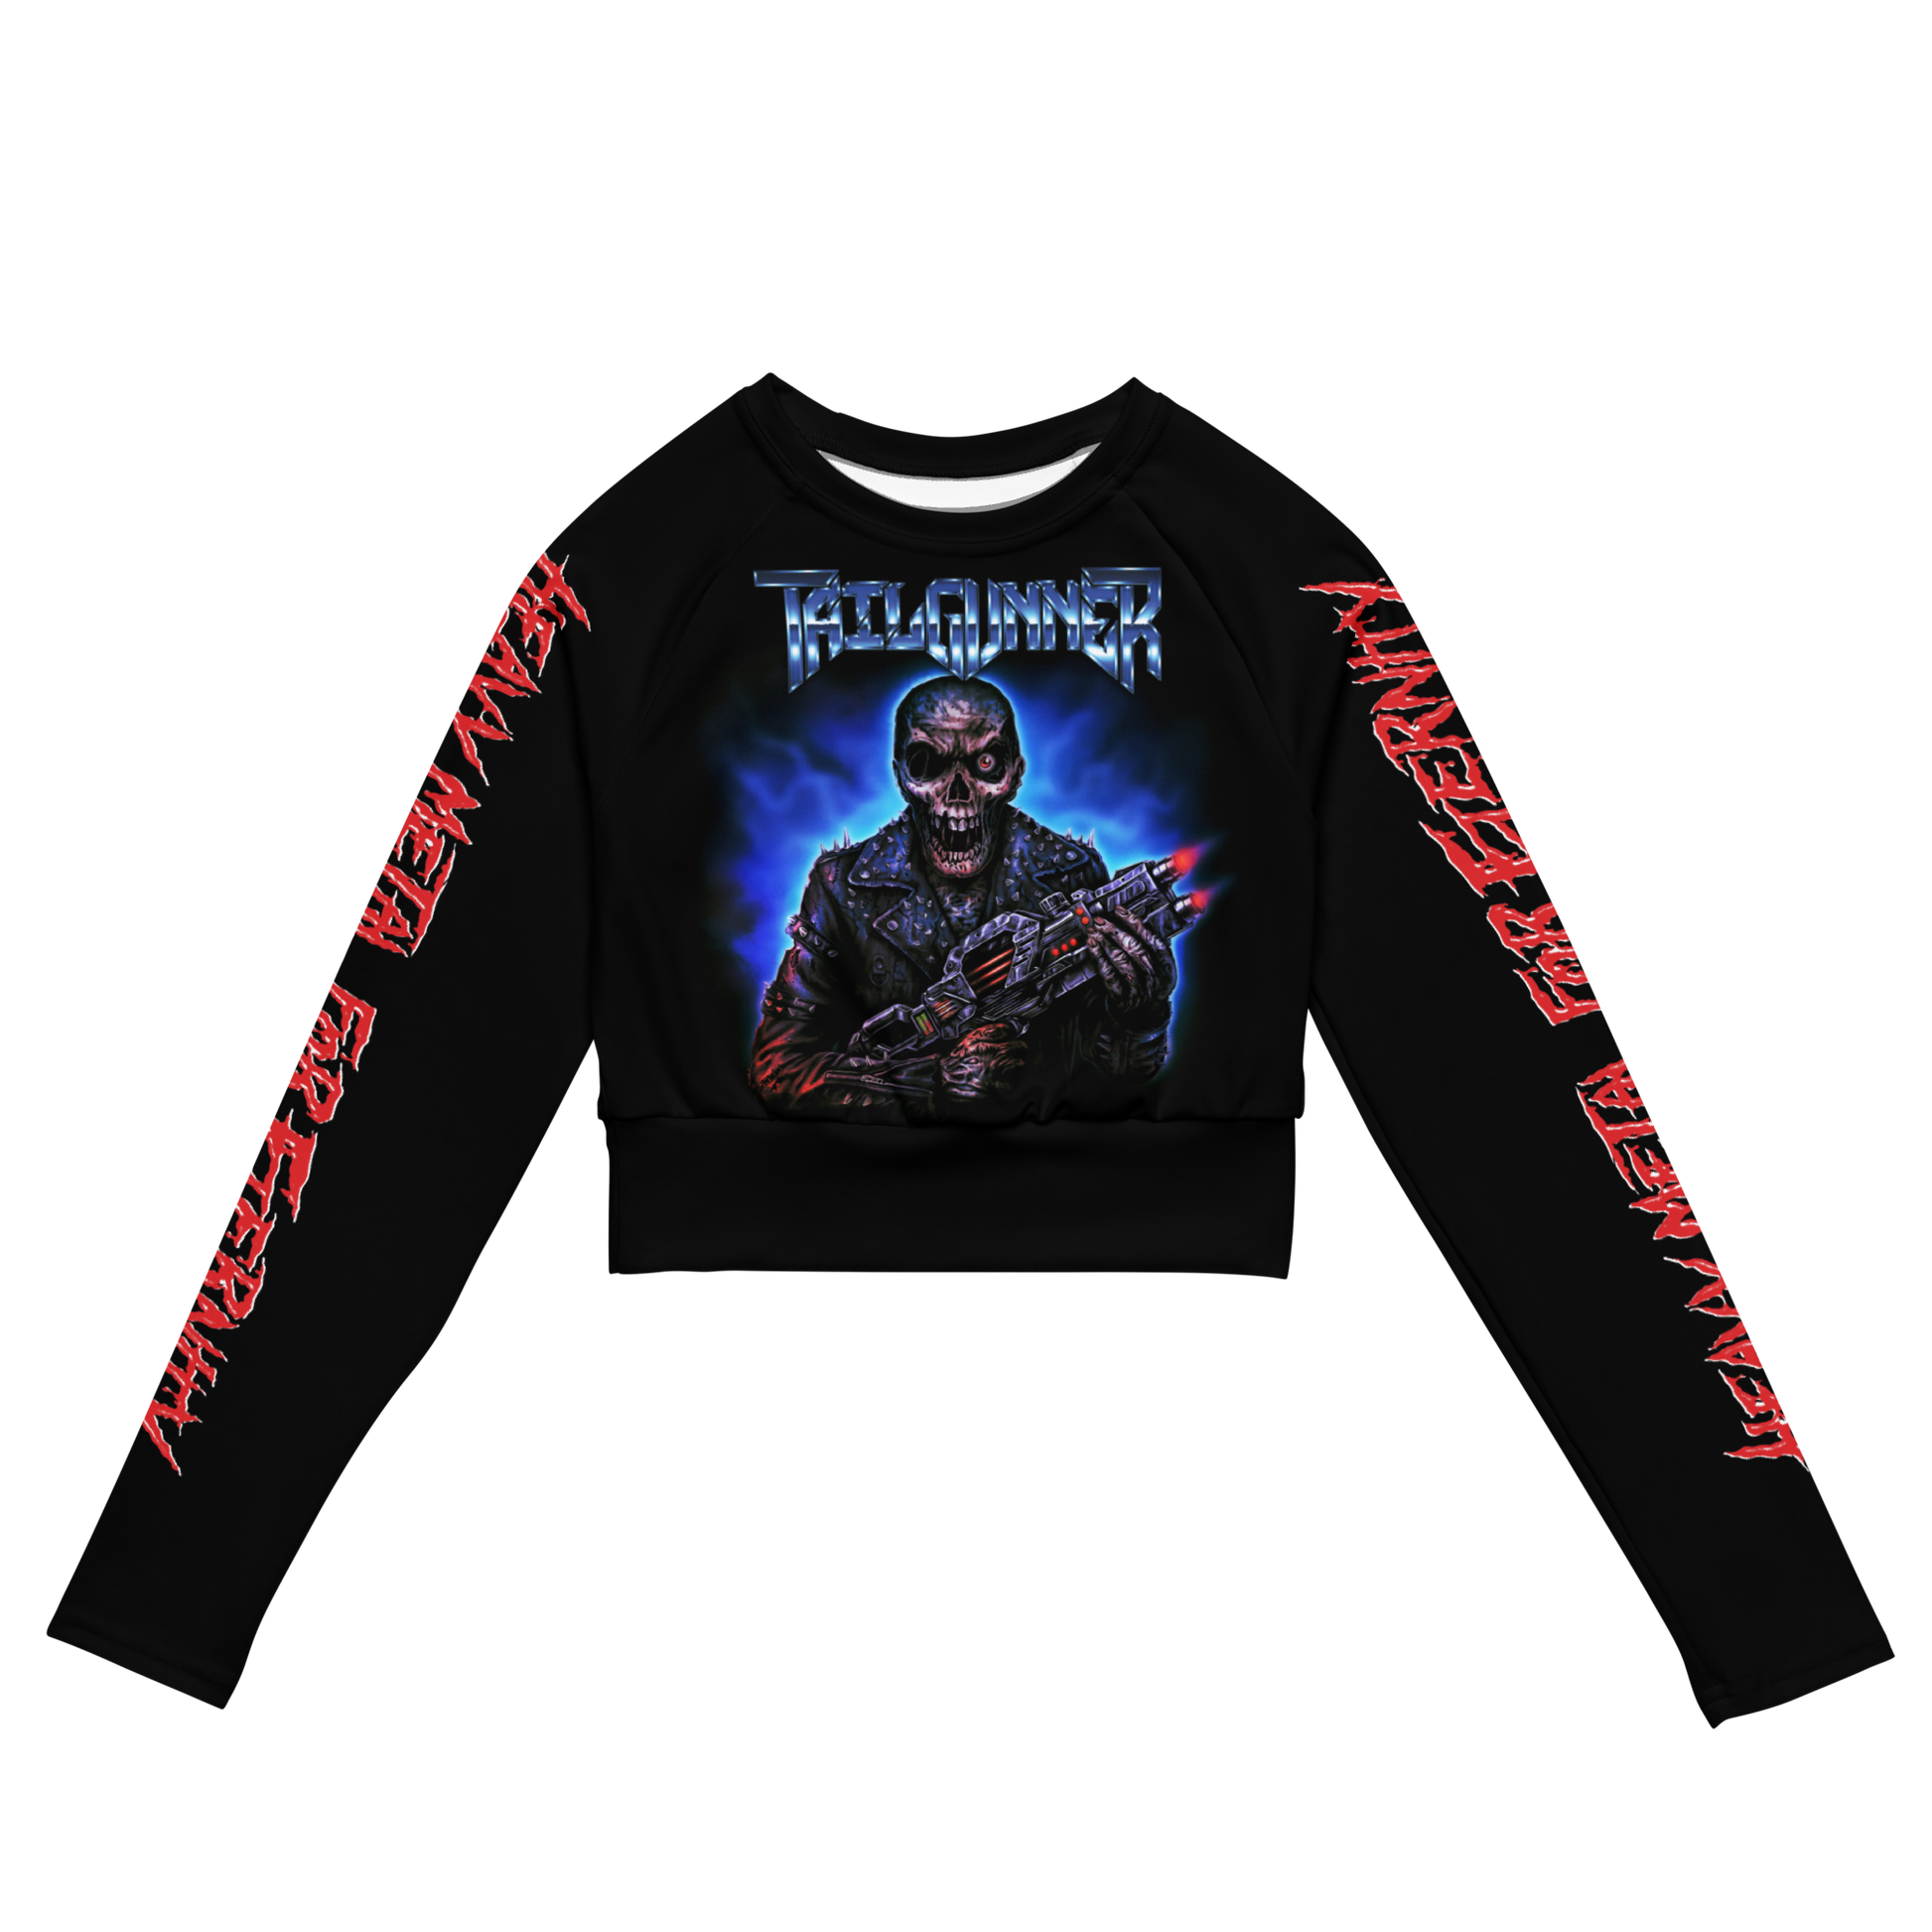 Tailgunner Guns For Hire official licensed long sleeve crop top by Metal Mistress